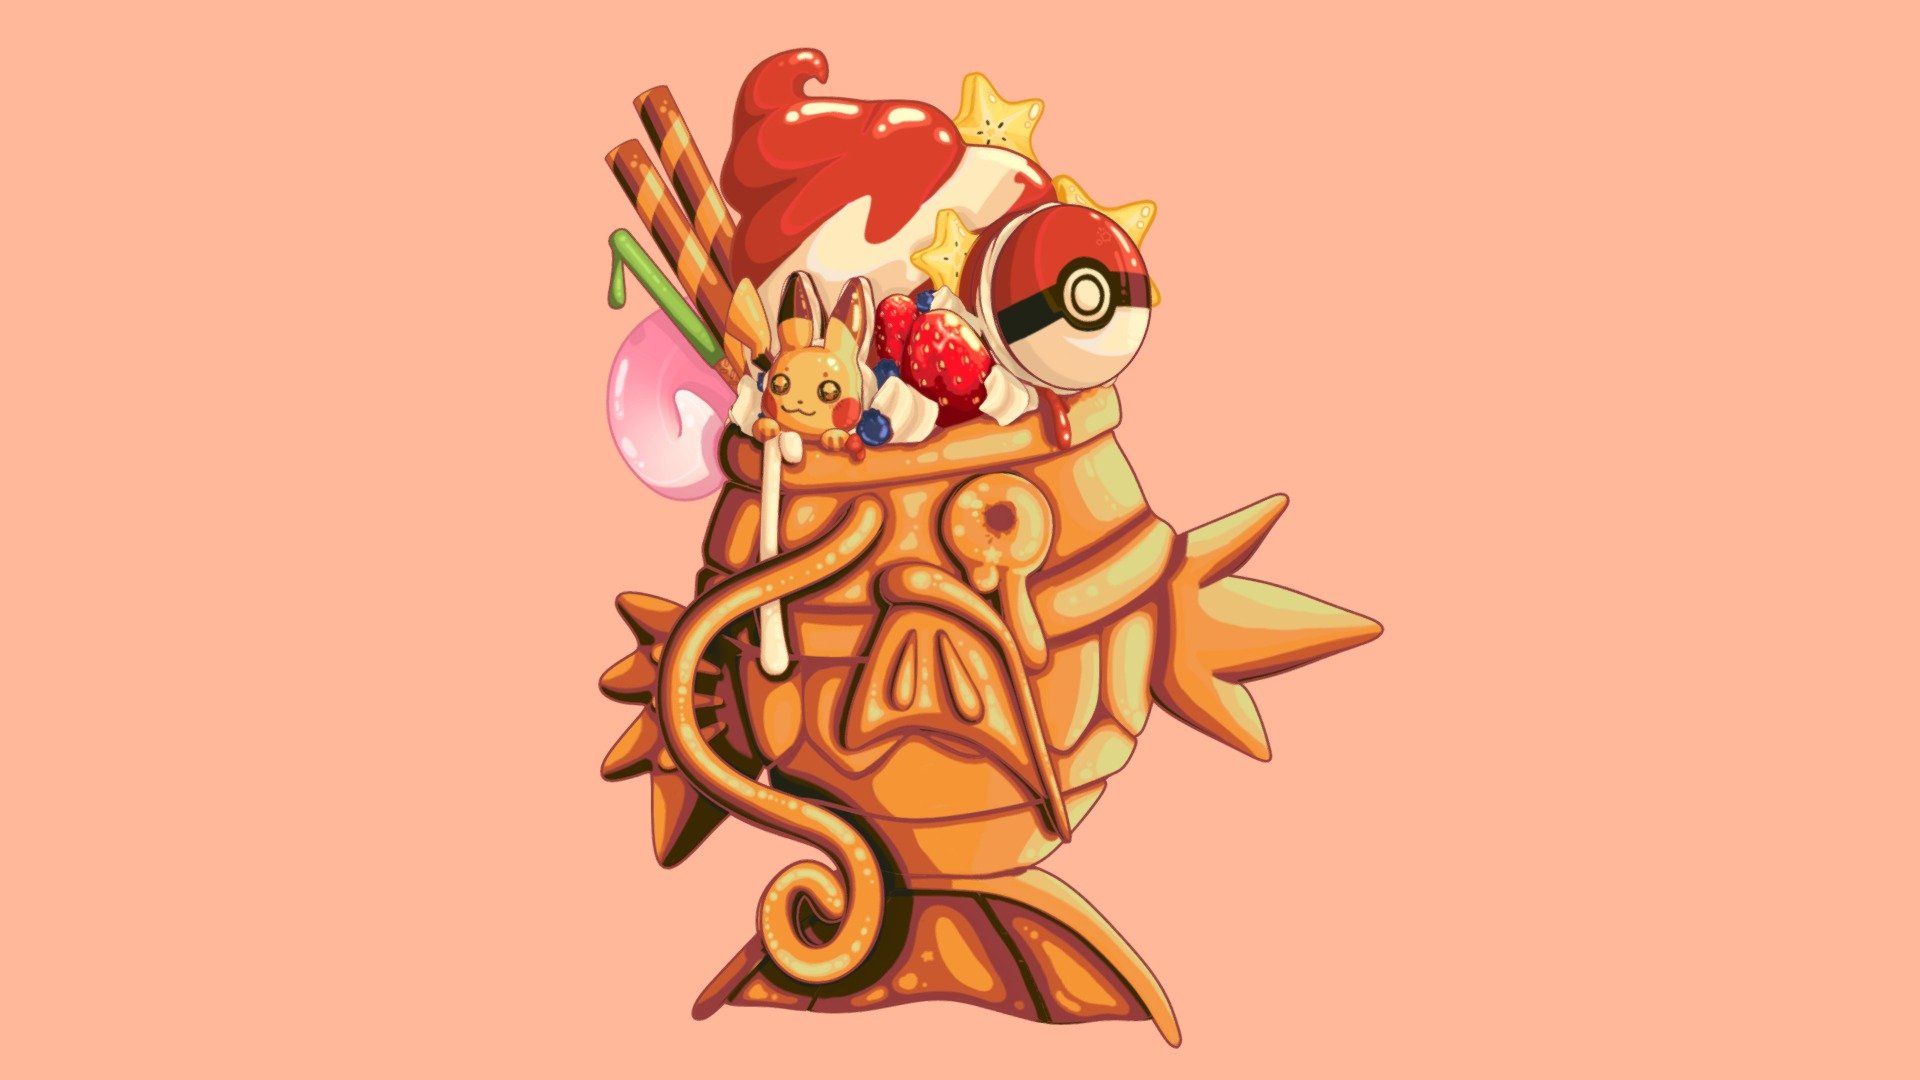 Magikarp Taiyaki, topped with ice cream, pokemon macaroons, fruit, cookies, and a slowpoke tail.

Made in Blender with handpainted textures.

Check out my Instagram nicole_davisart, or Twitter NDavisart to see how the model looks in Blender 3d model